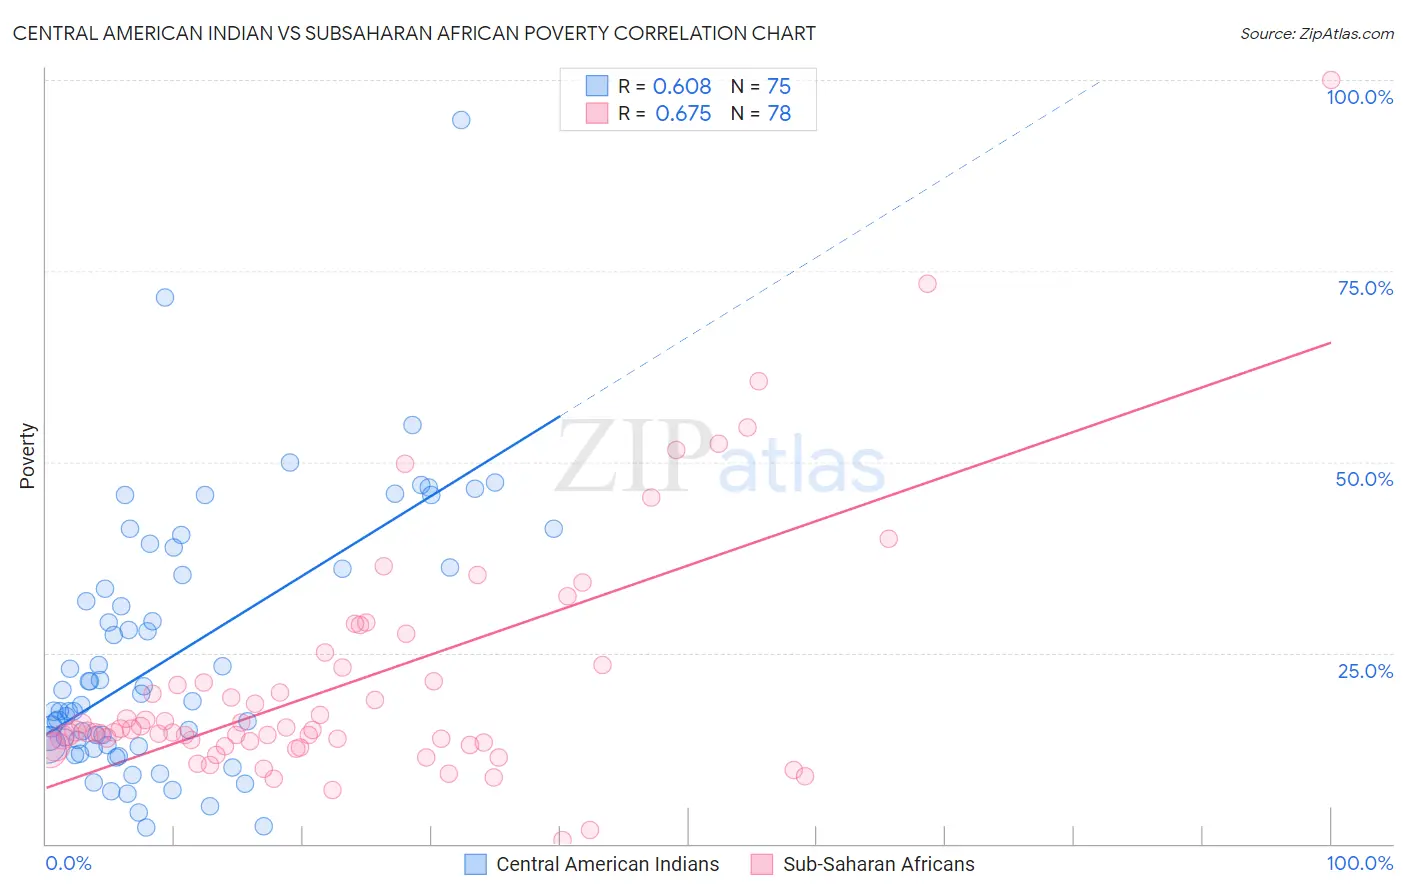 Central American Indian vs Subsaharan African Poverty